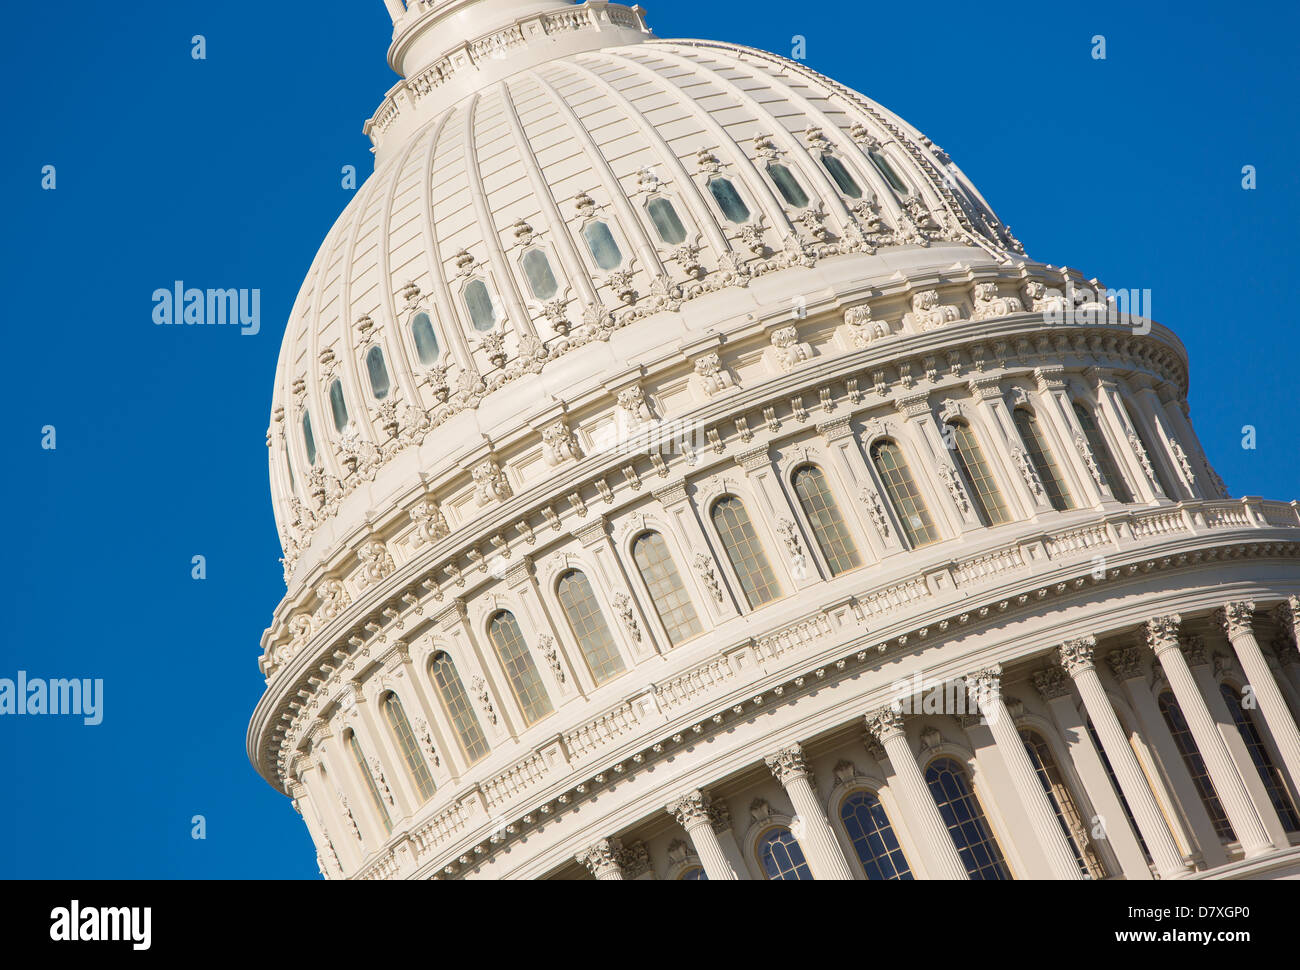 WASHINGTON, DC, USA - Tilted view of United States Capitol building dome. Stock Photo